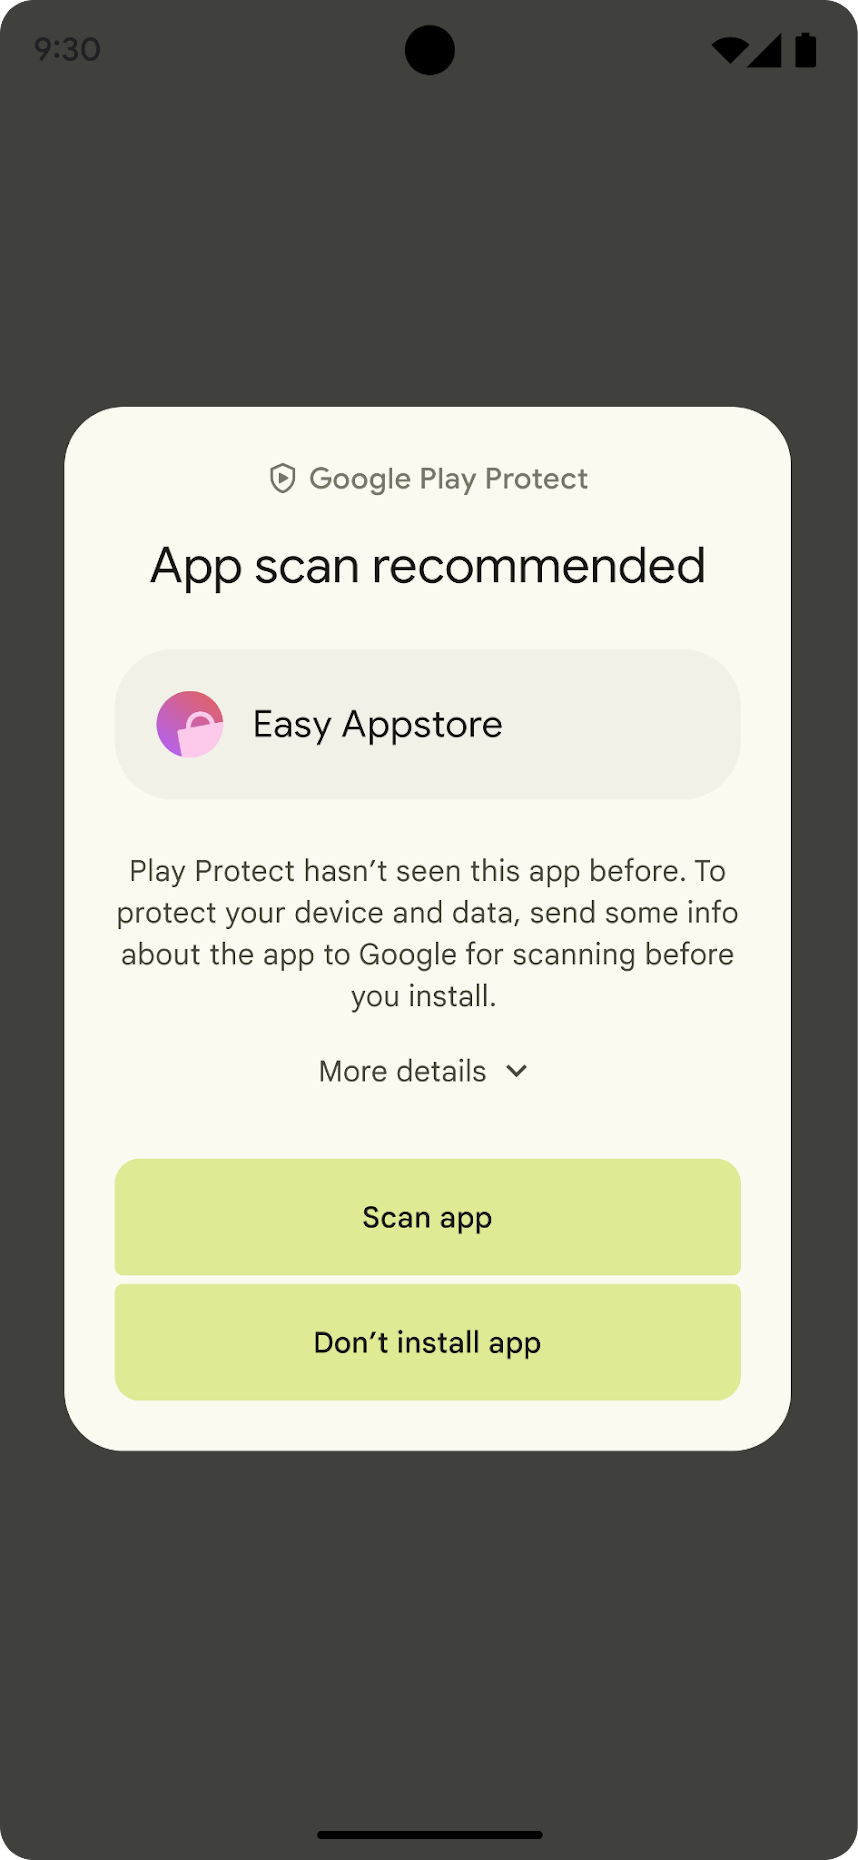 The two buttons on the dialog, from top to bottom, are Scan app and
    Don't install app